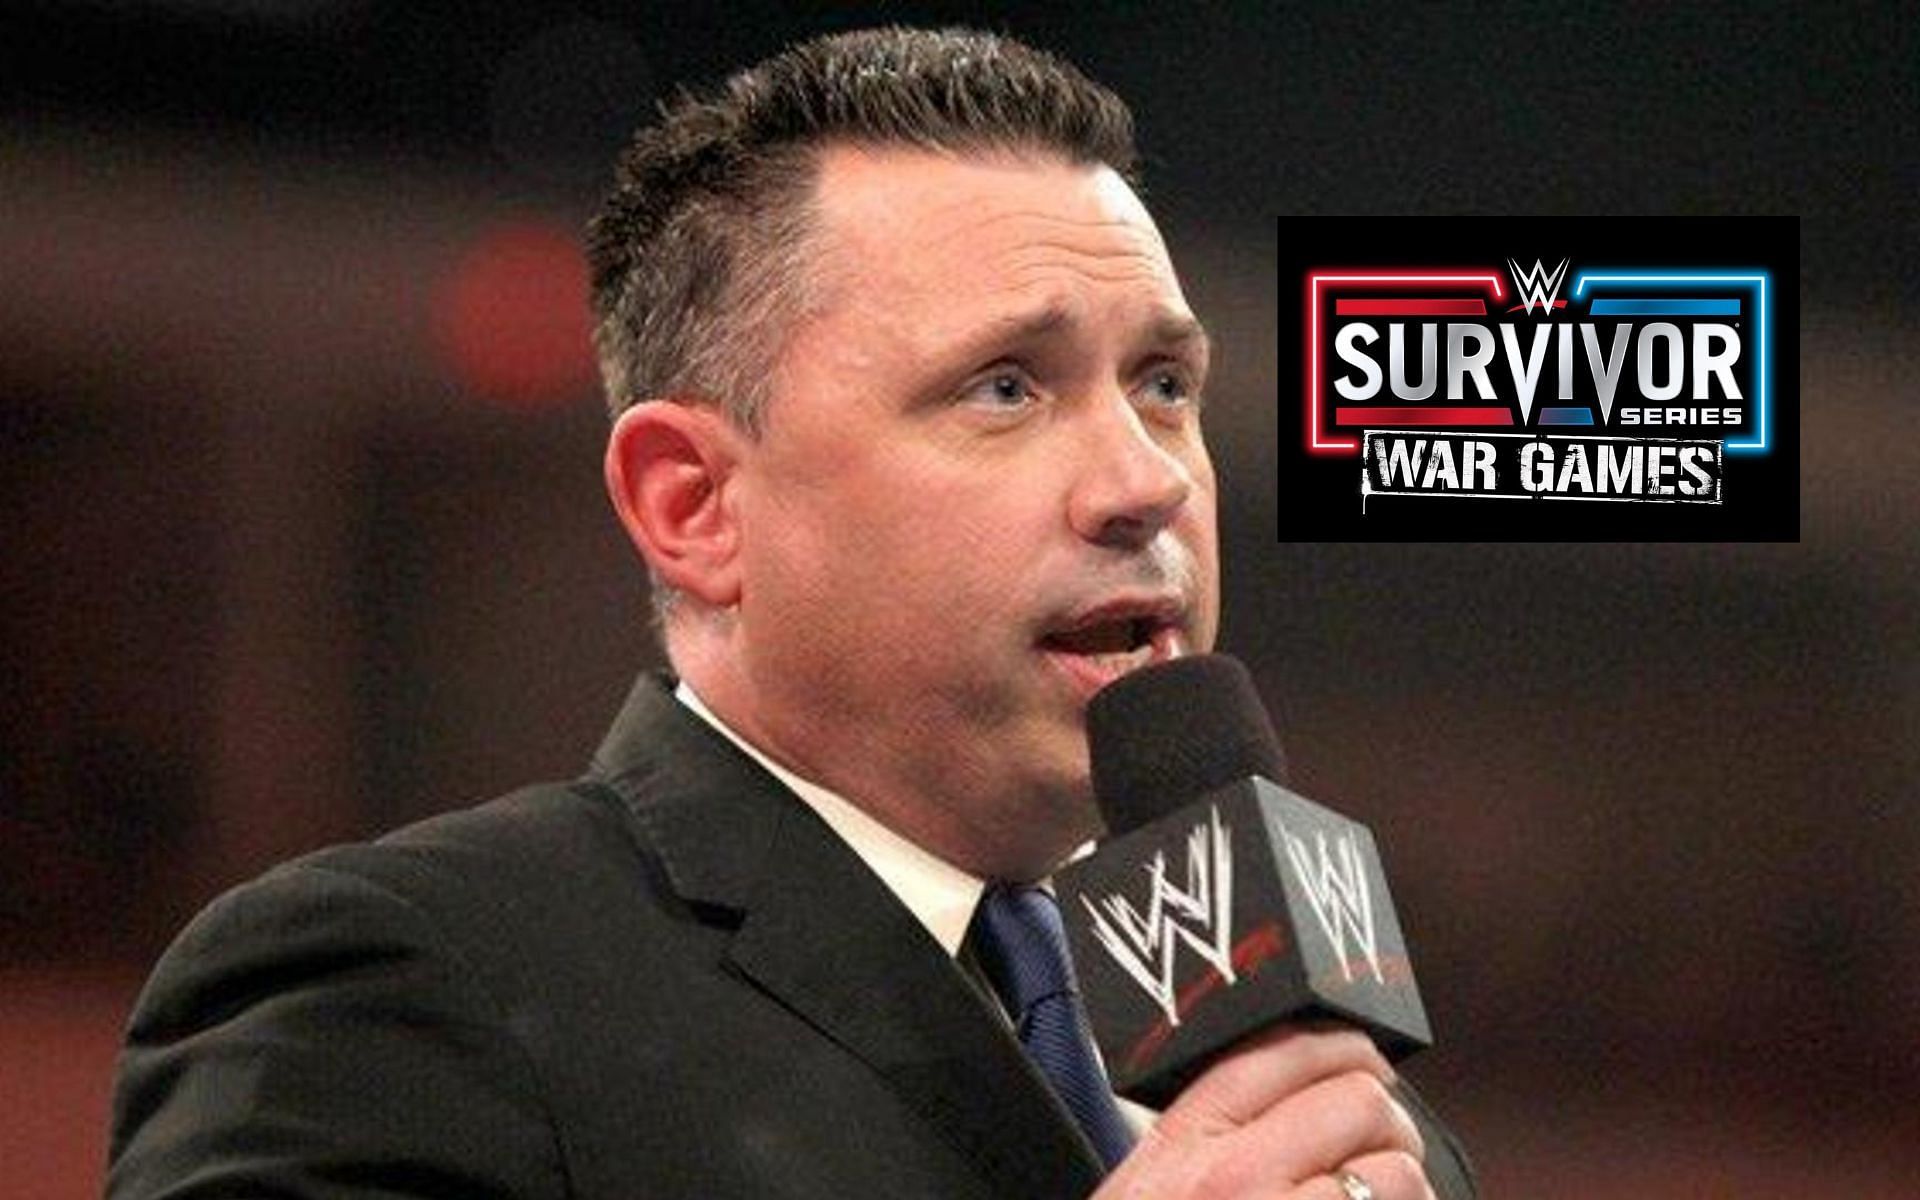 Michael Cole has been associated with WWE for nearly 25 years and counting